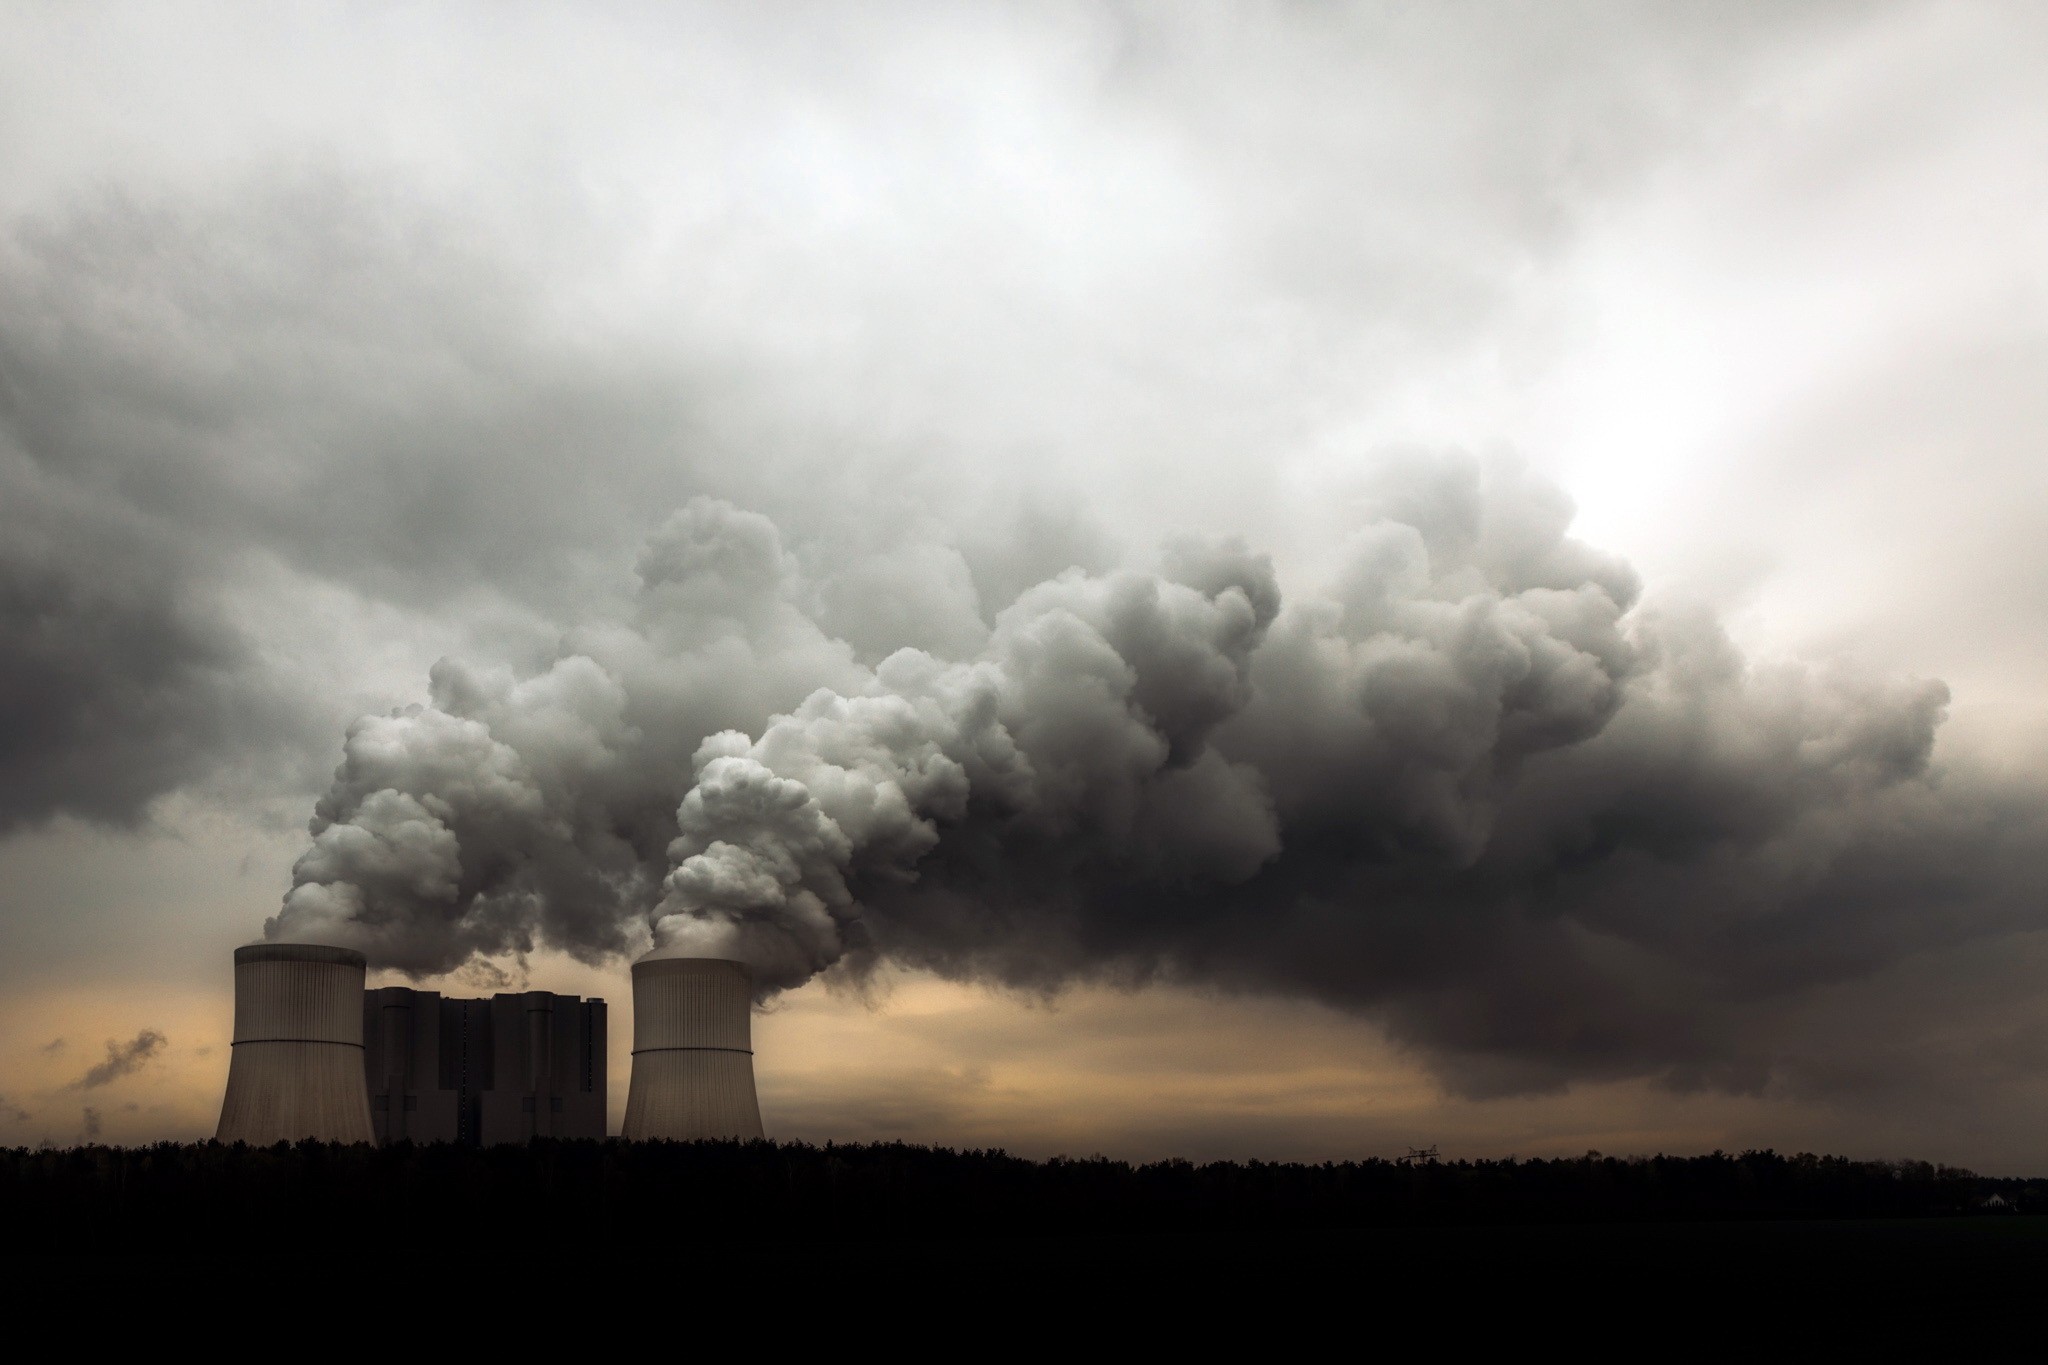 General 2048x1365 industrial smoke environment cooling towers nuclear clouds nuclear power plant depressing pollution